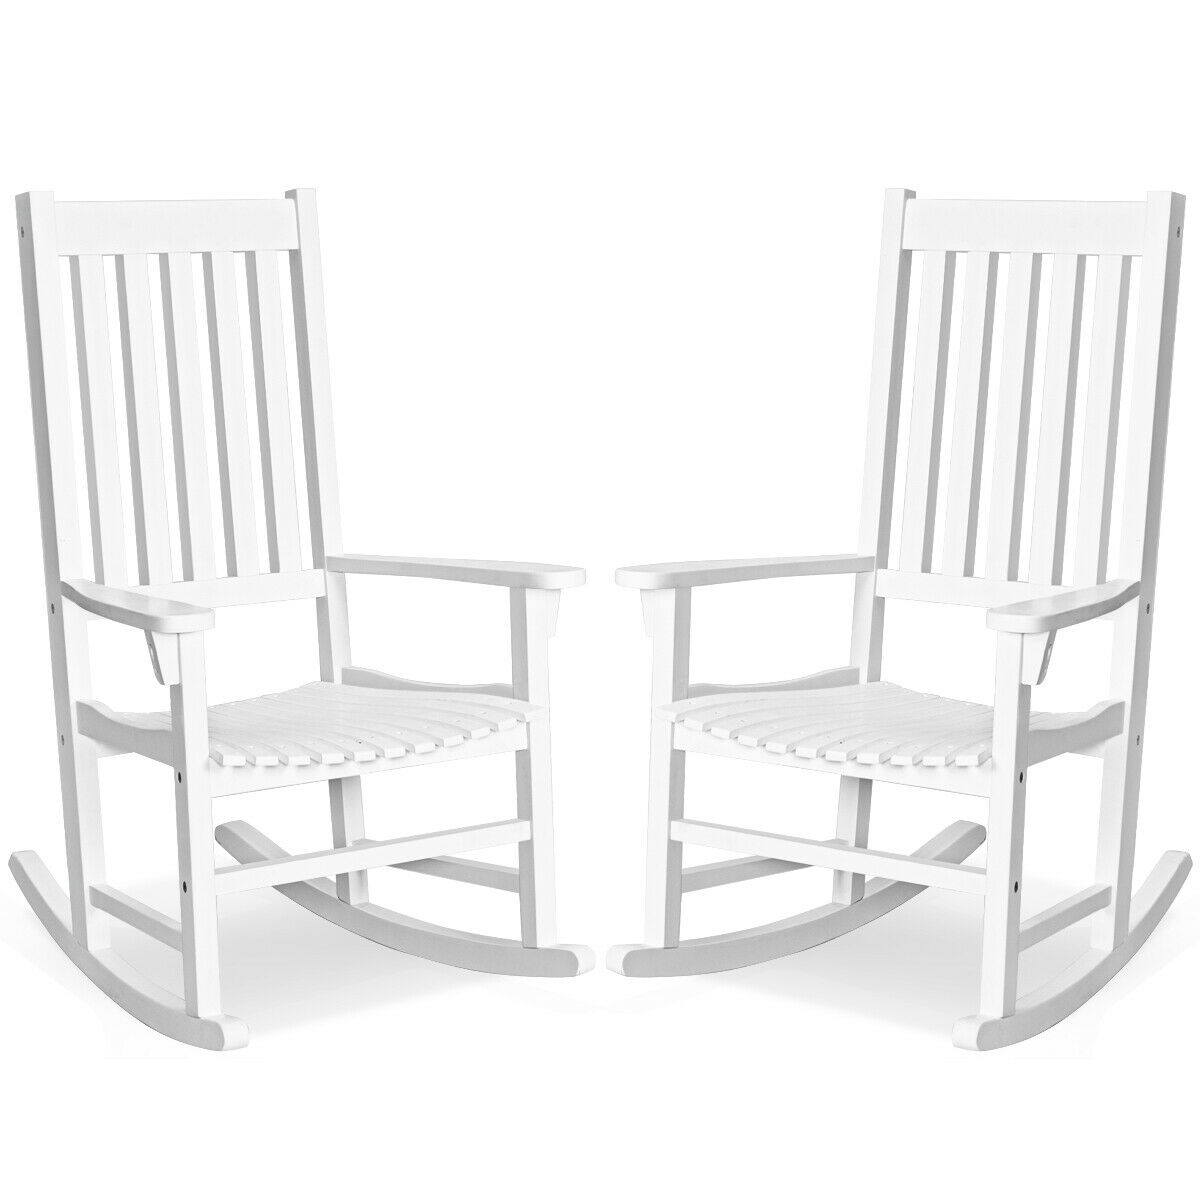 Gymax 2PCS Wood Rocking Chair Porch Rocker High Back Garden Seat Indoor Outdoor White - image 1 of 10